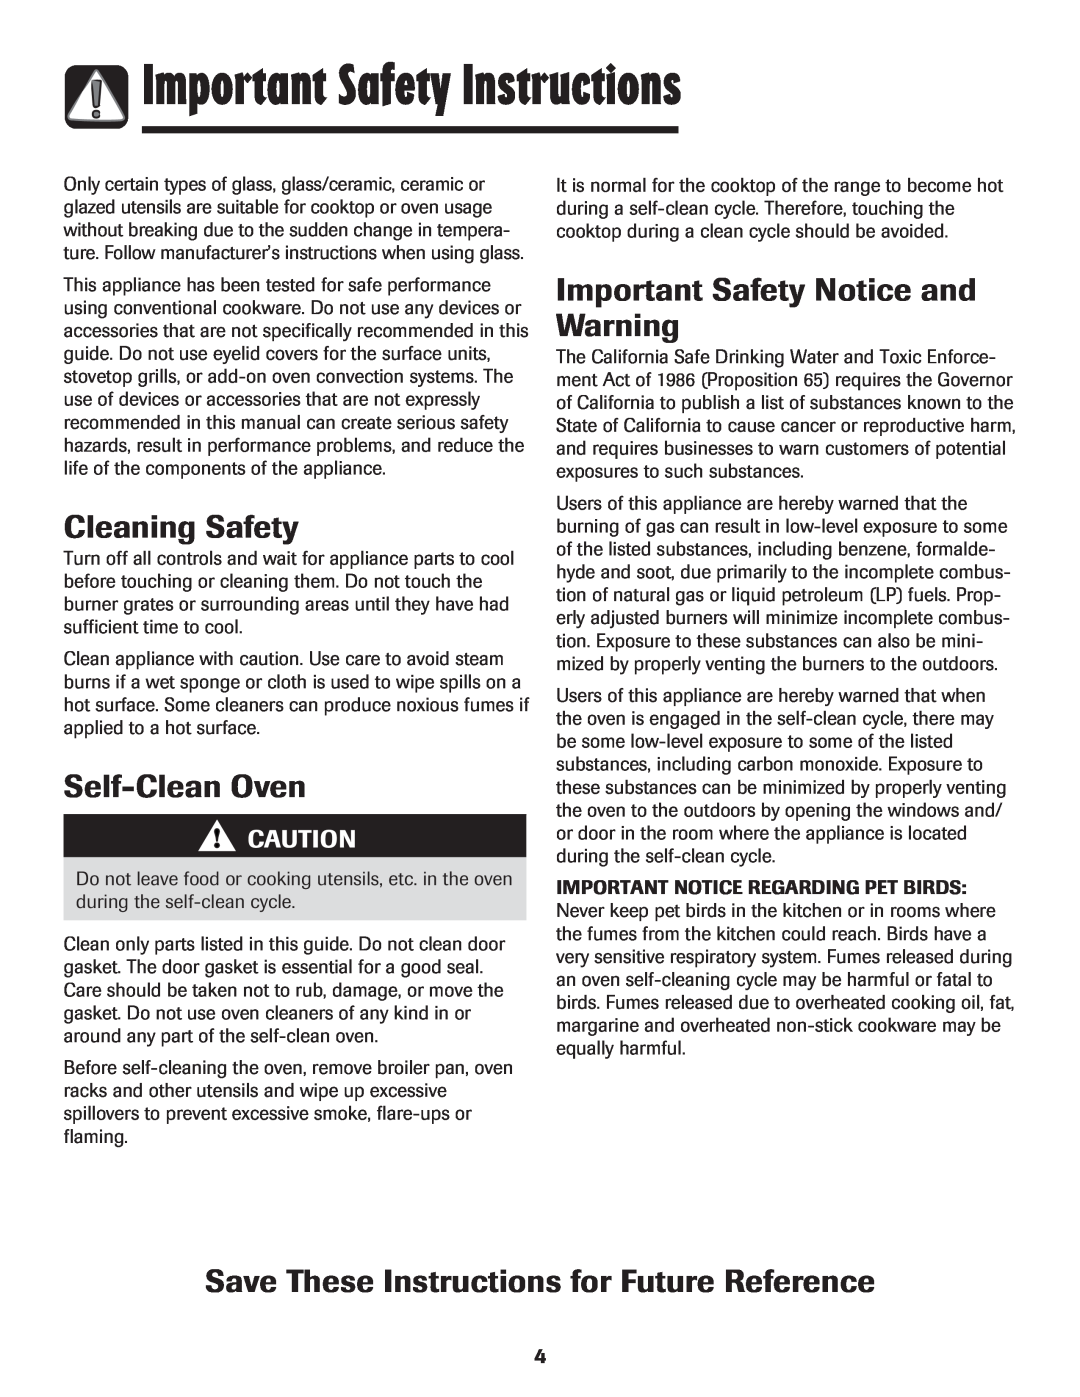 LG Electronics 800 Cleaning Safety, Self-CleanOven, Important Safety Notice and Warning, Important Safety Instructions 